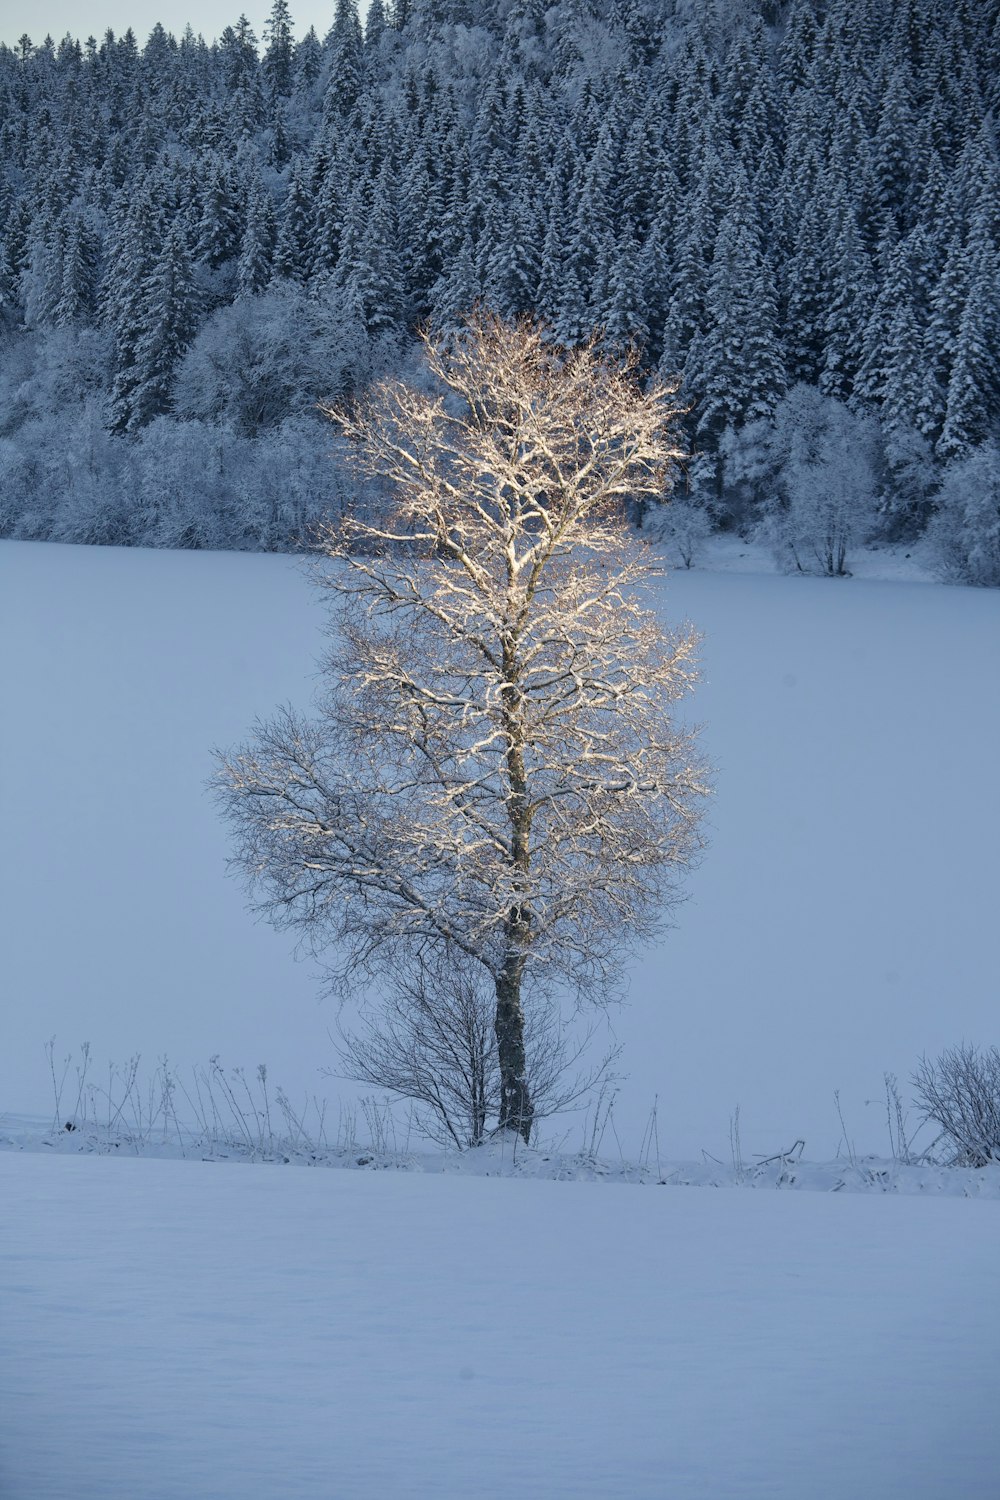 a lone tree stands in a snowy field